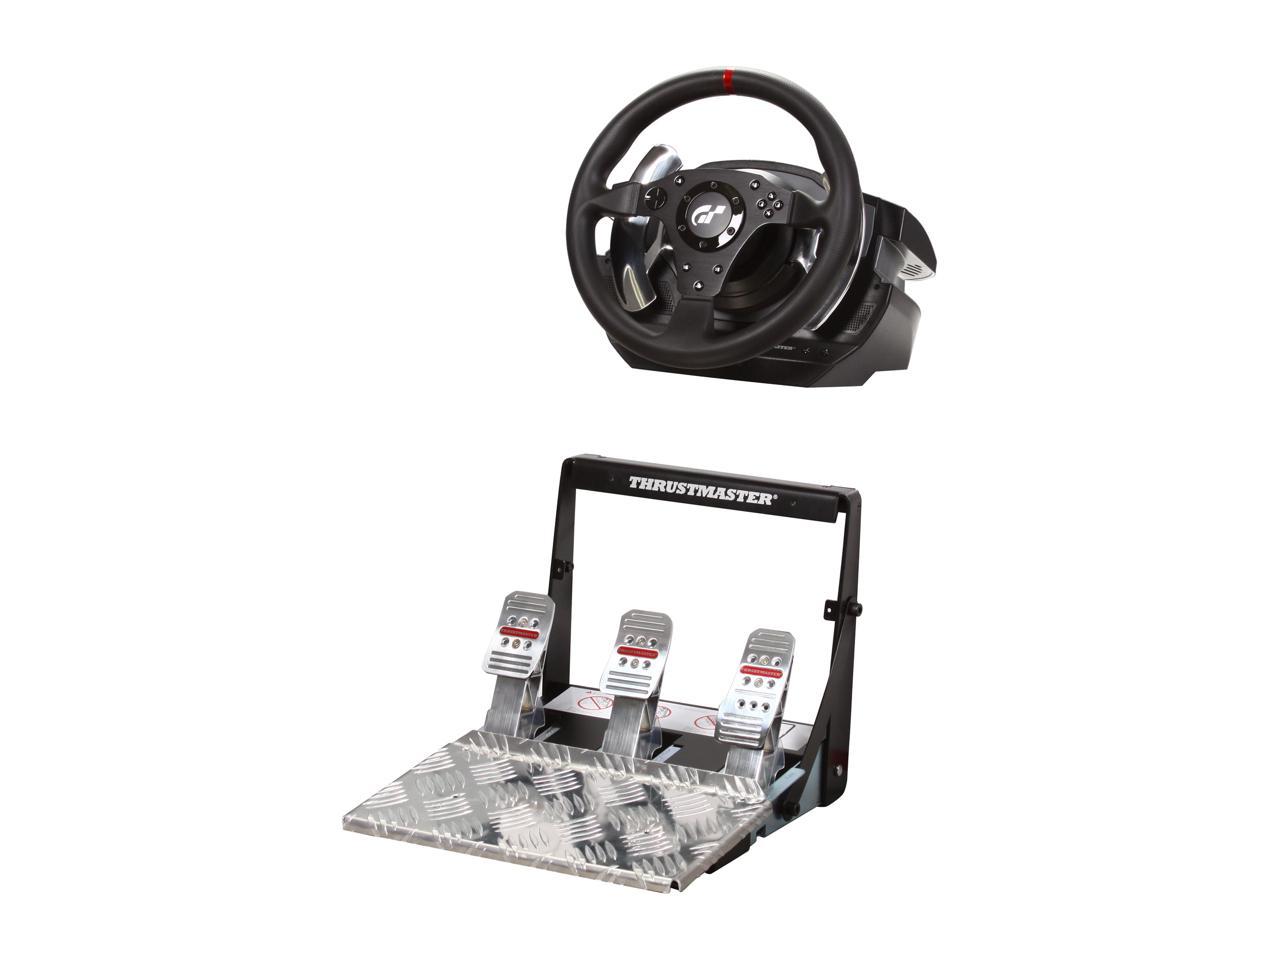 Thrustmaster t500. Thrustmaster t500rs. Трастмастер 818. Thrustmaster t300 и Moza 5. Thrustmaster t500rs КПП.